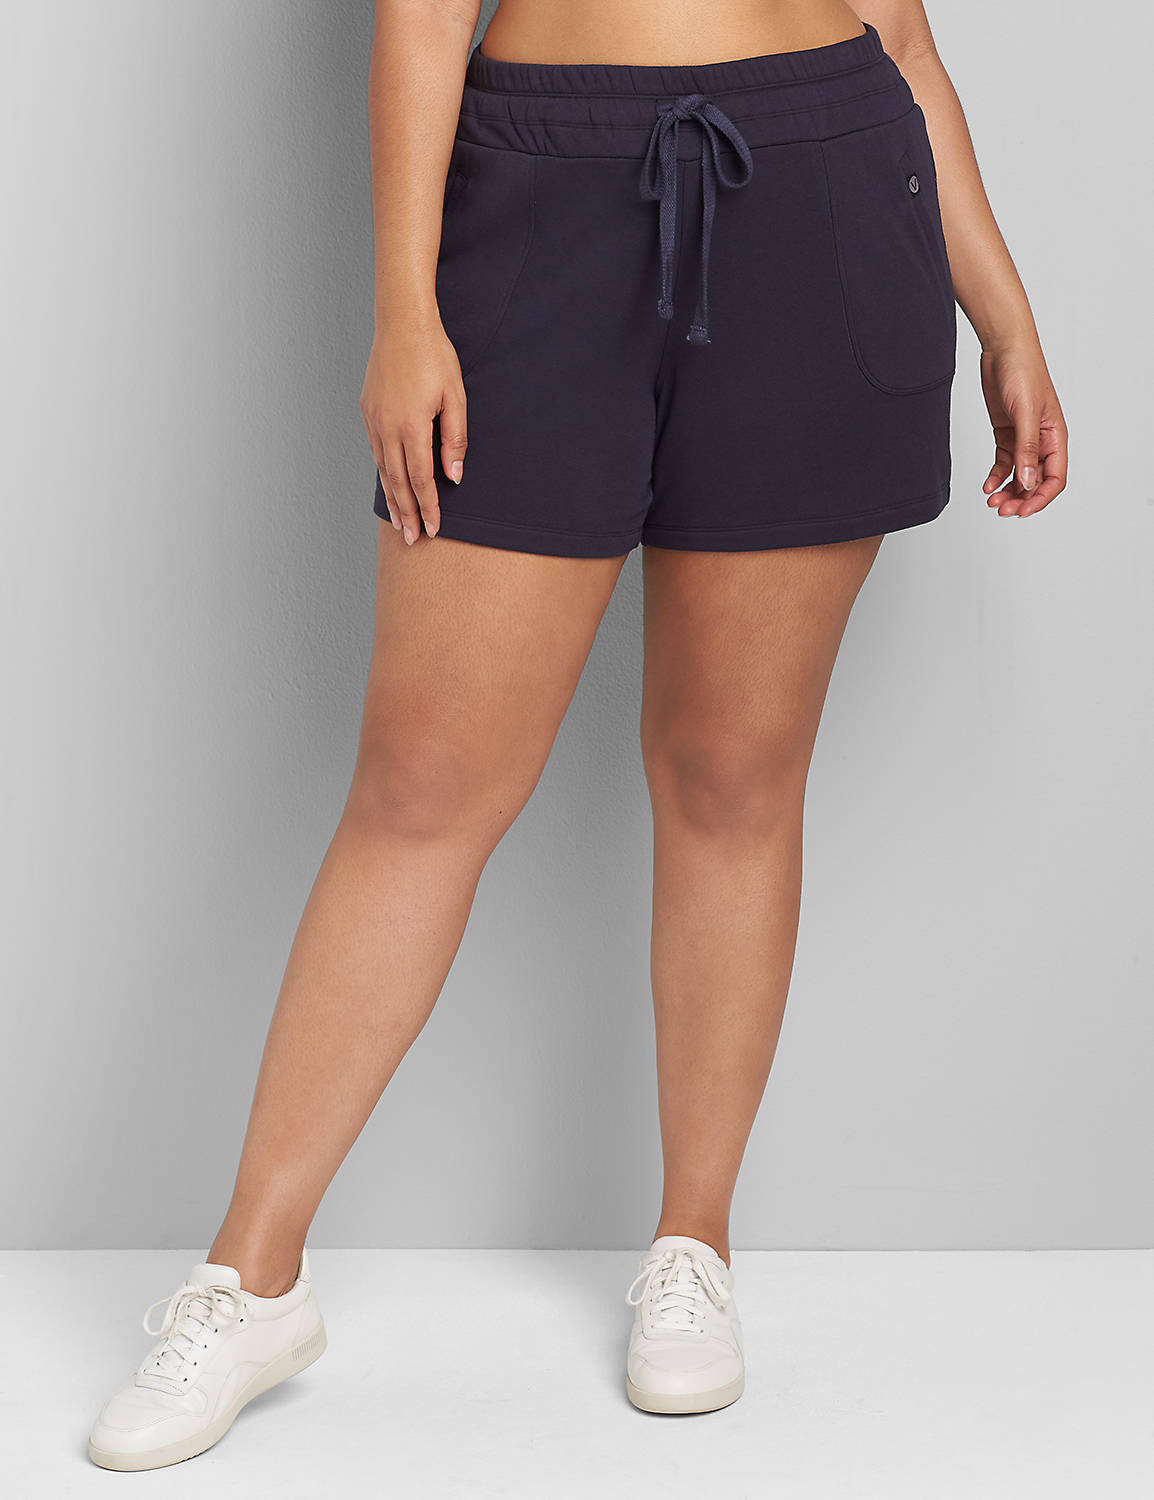 Pull On French Terry Short  S 11201 Product Image 1